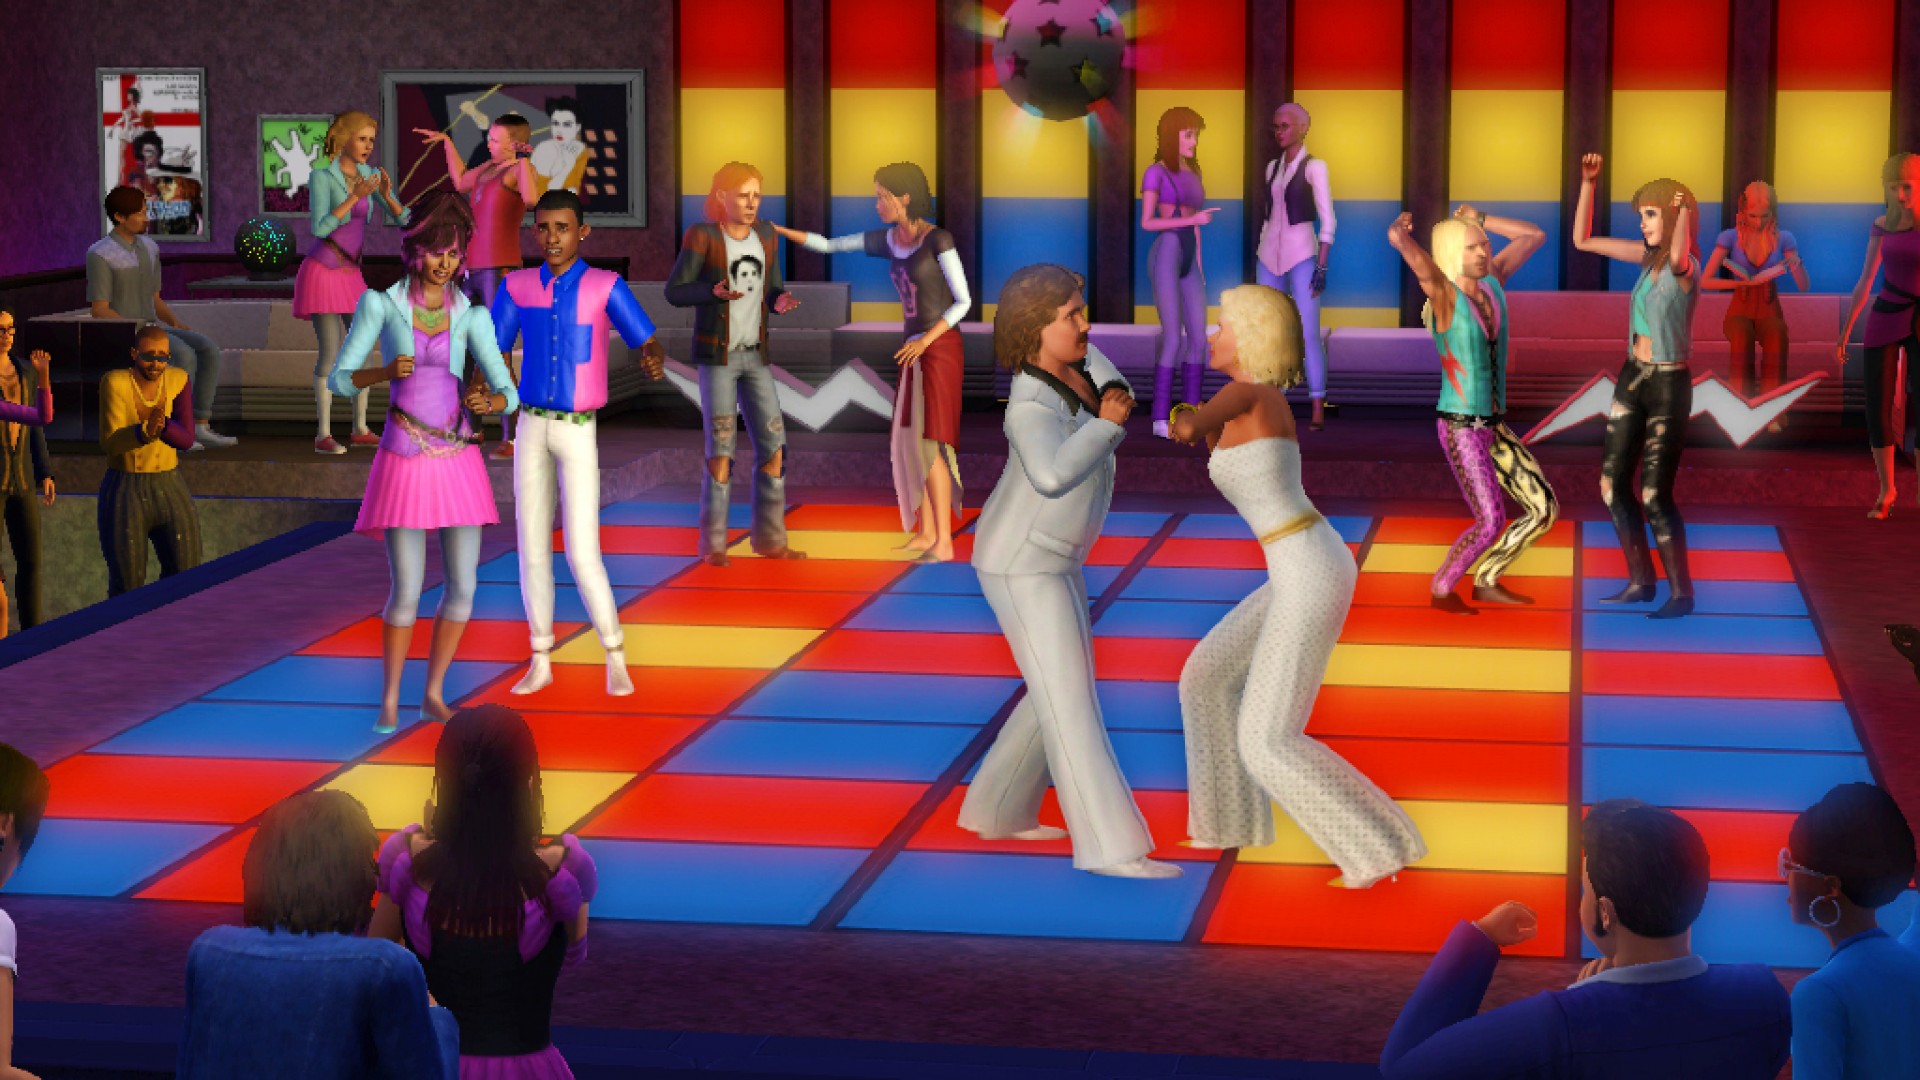 The Sims 3 70's, 80's and 90's screenshot